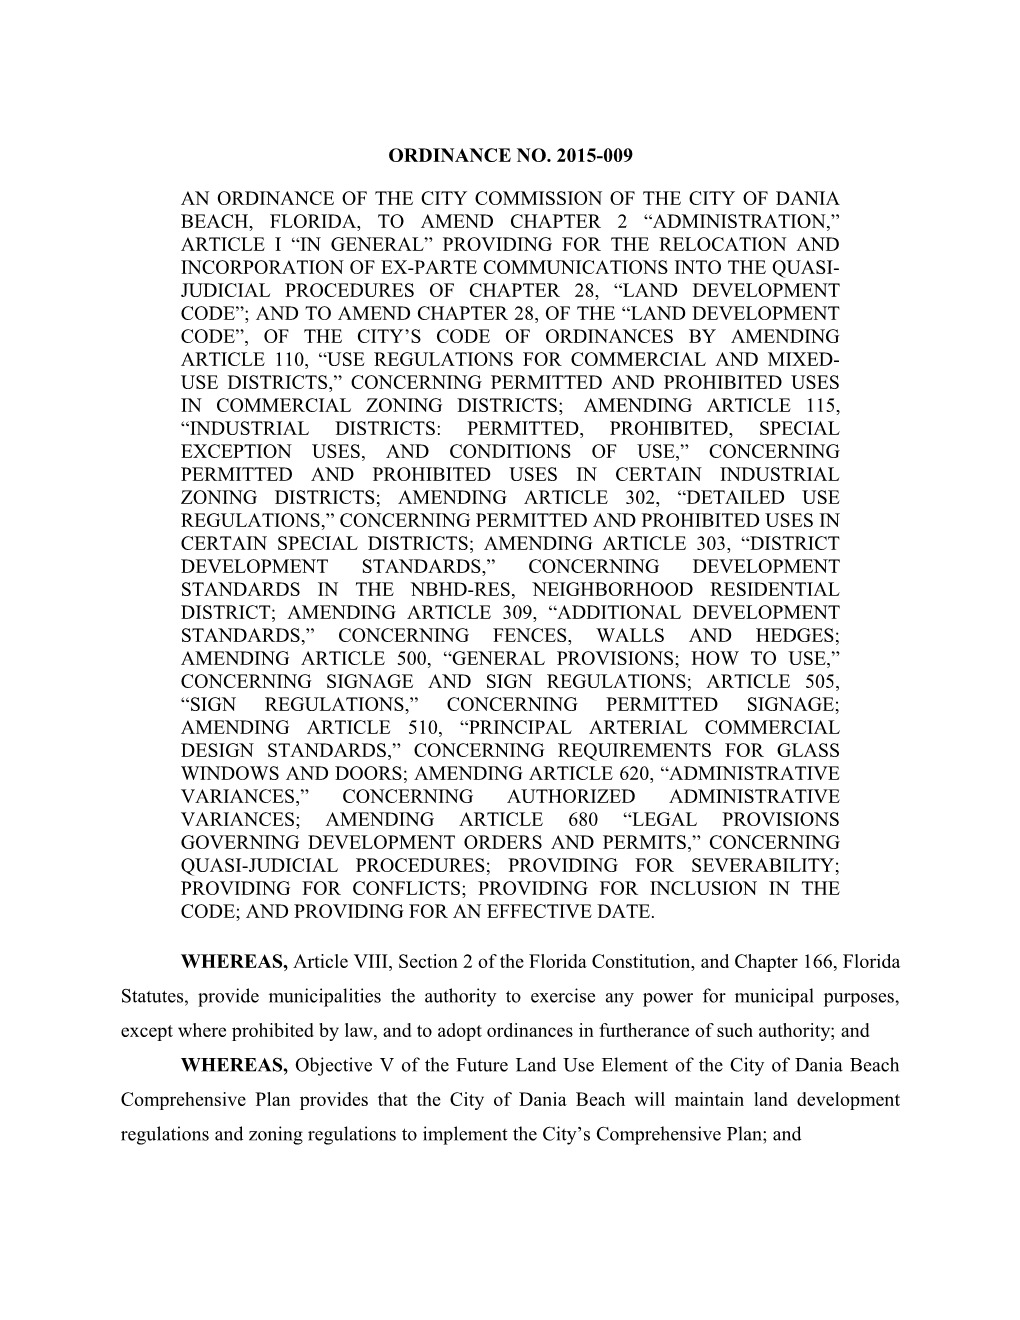 An Ordinance of the City Commission of the City of Dania Beach, Florida, to Amend Chapter